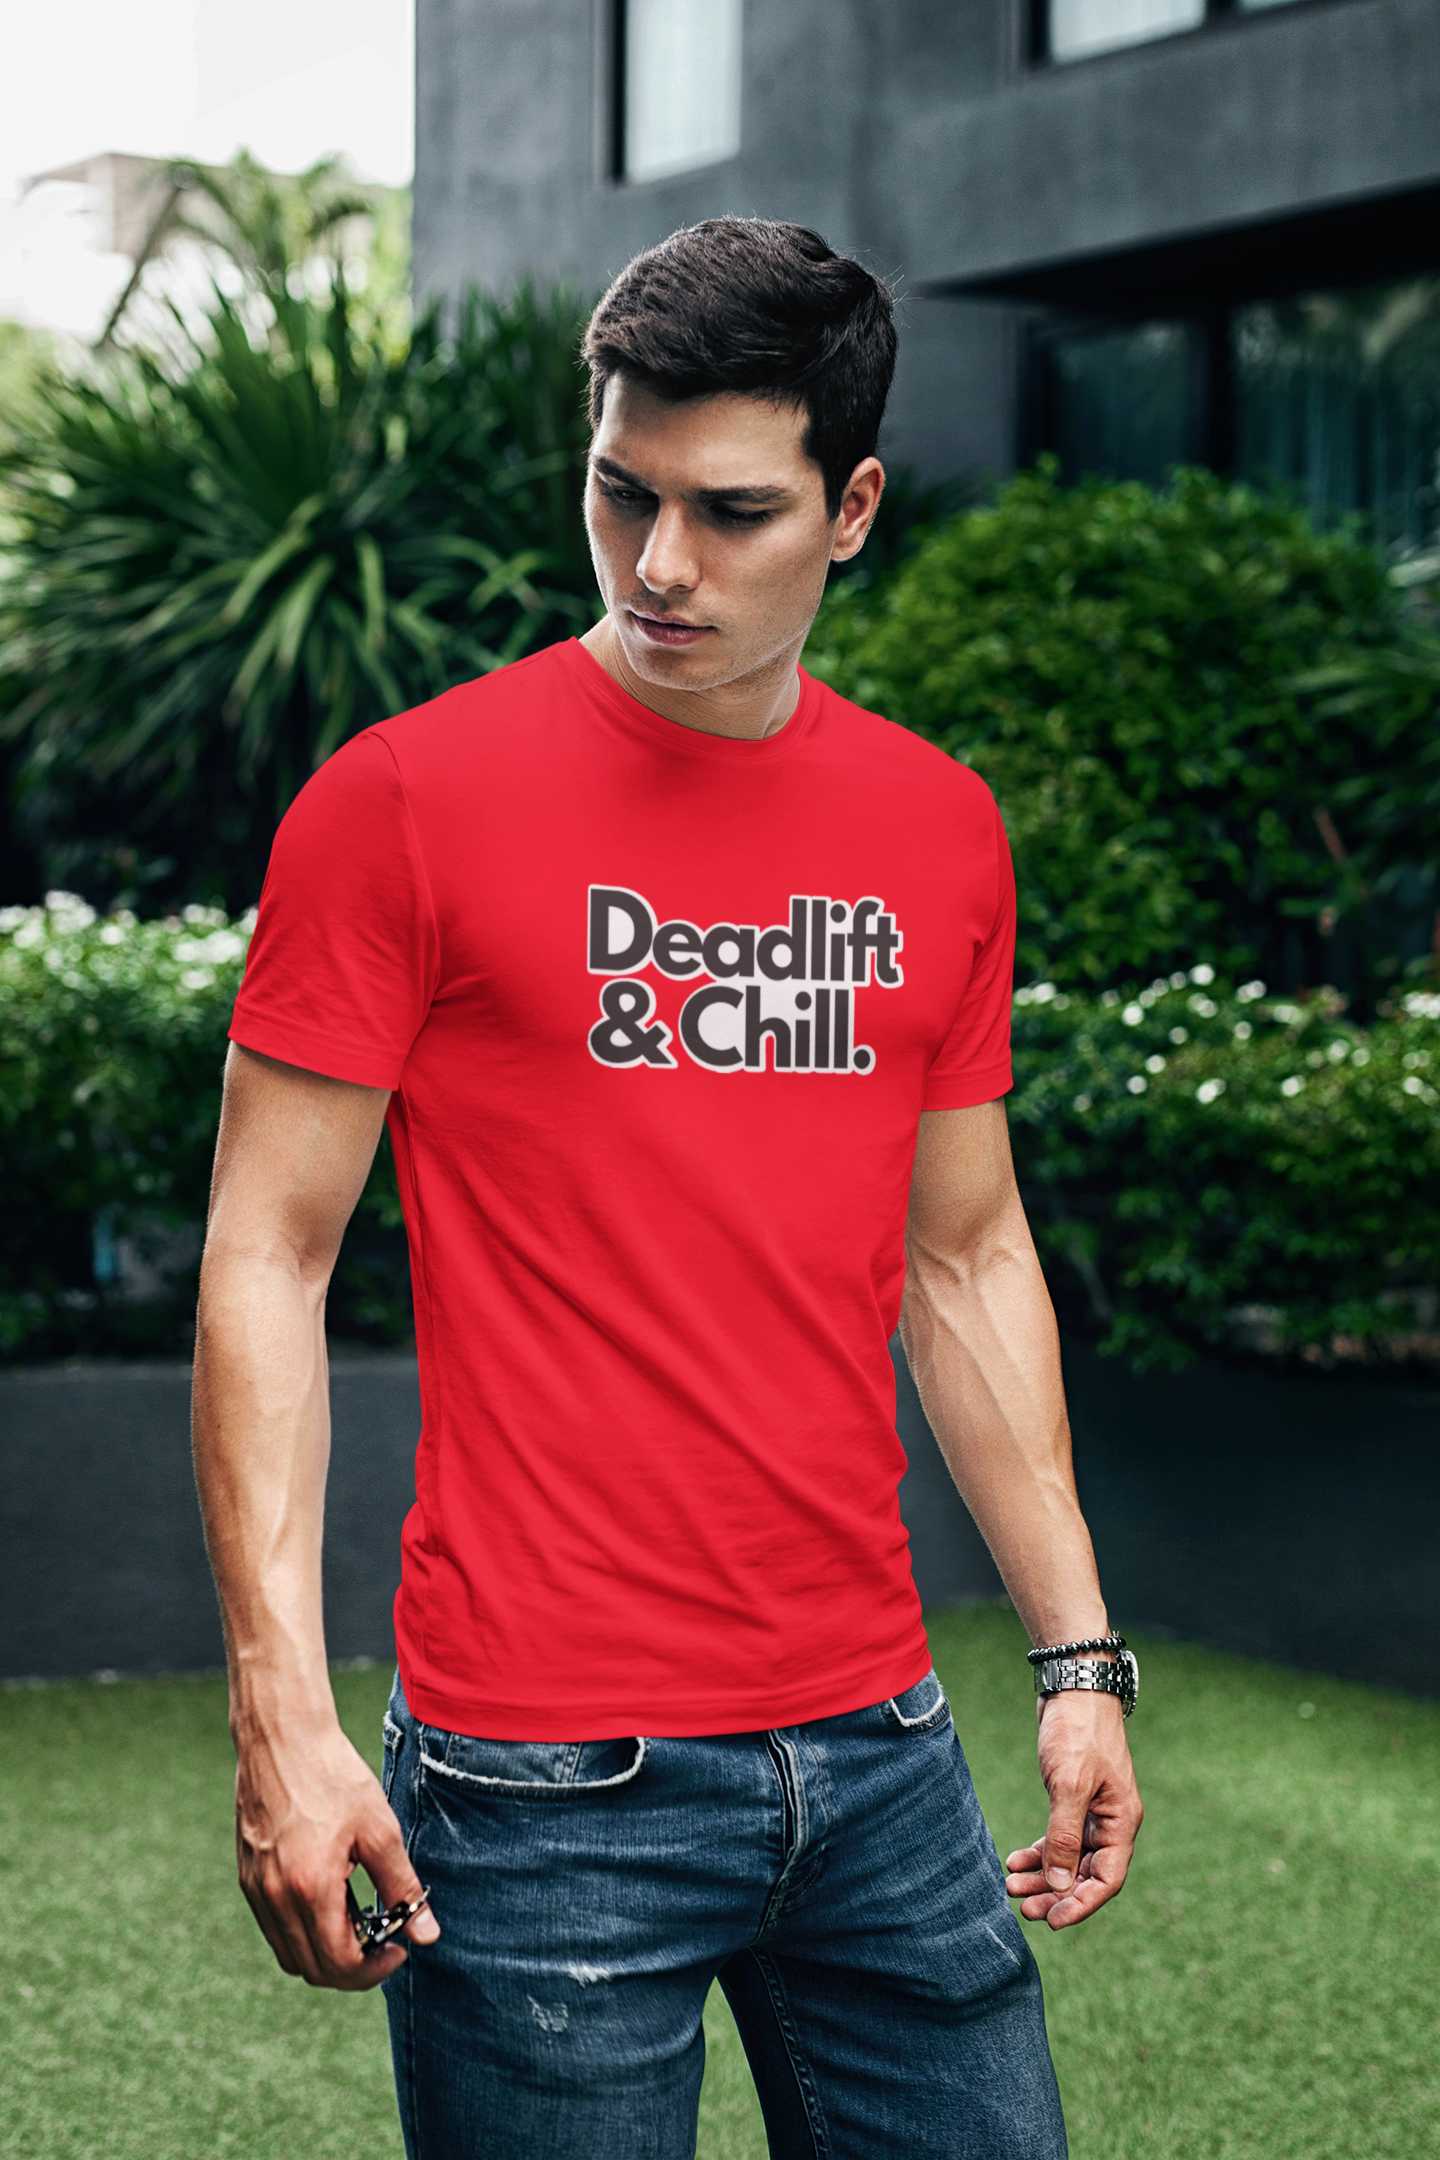 Deadlift And Chill - Gym T Shirt Strong Soul Shirts & Tops